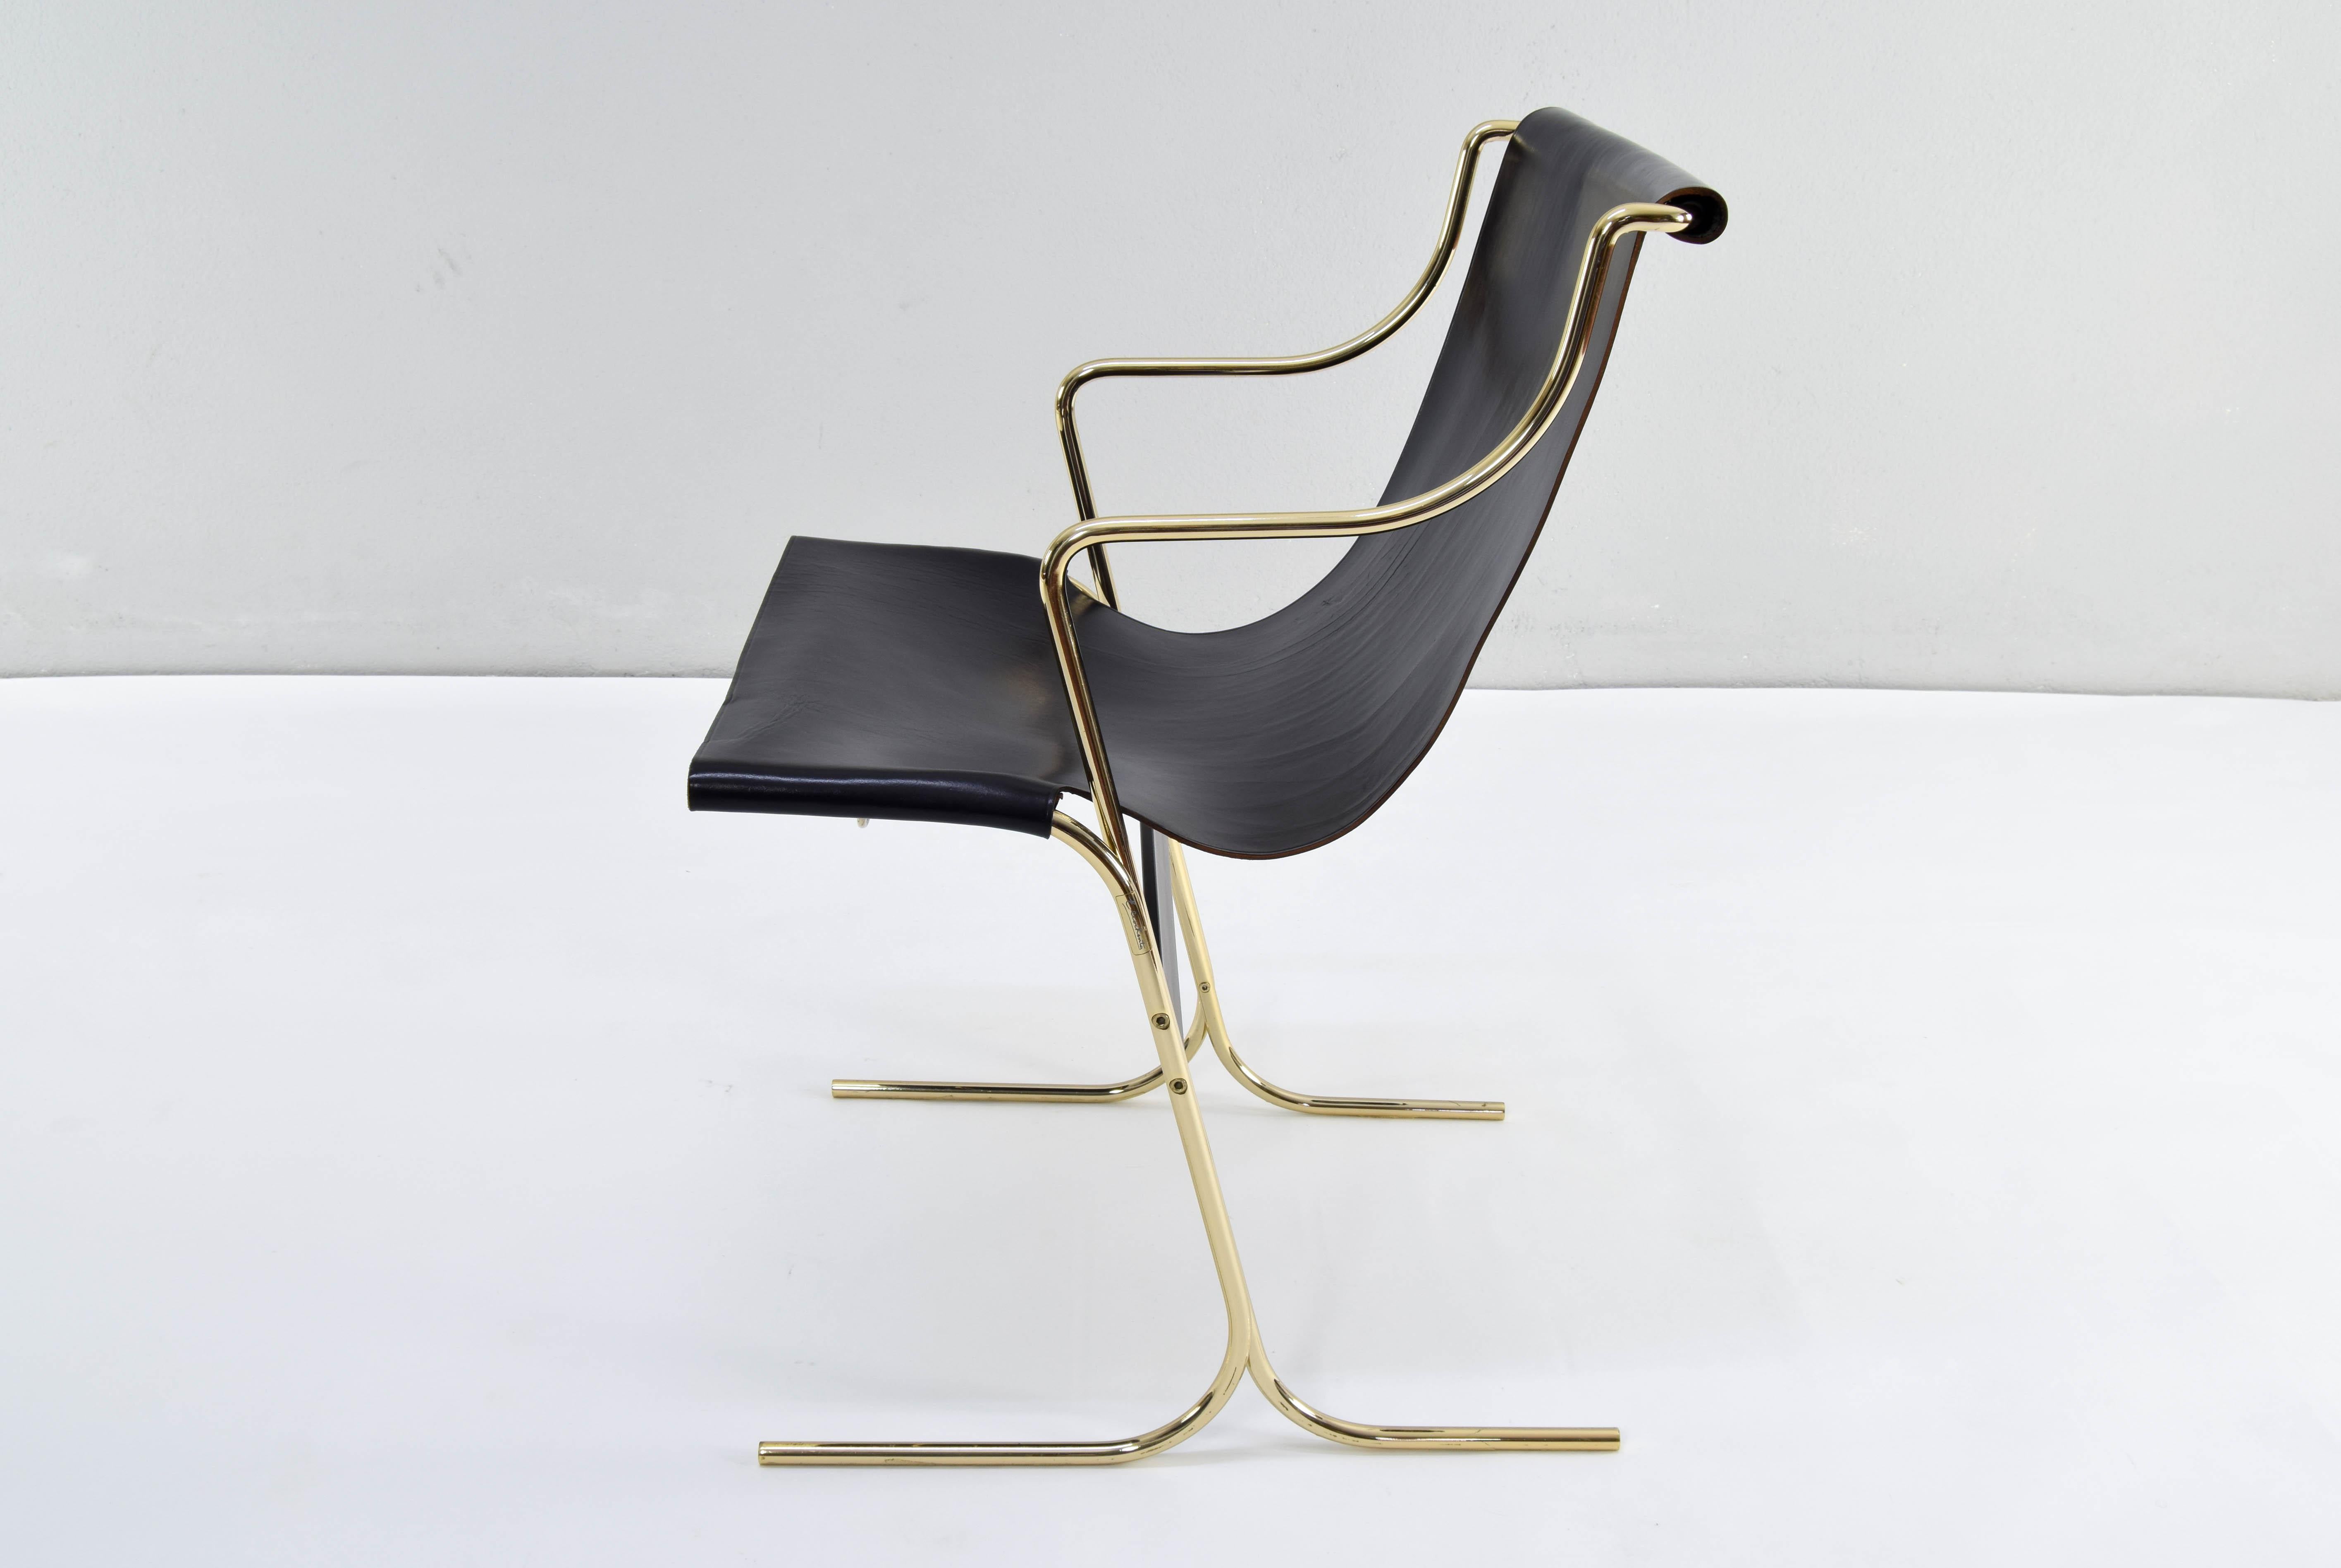 Pair of Leather and Brass Cigno Chairs by Ross Littell and Kelly to Padova Italy 1